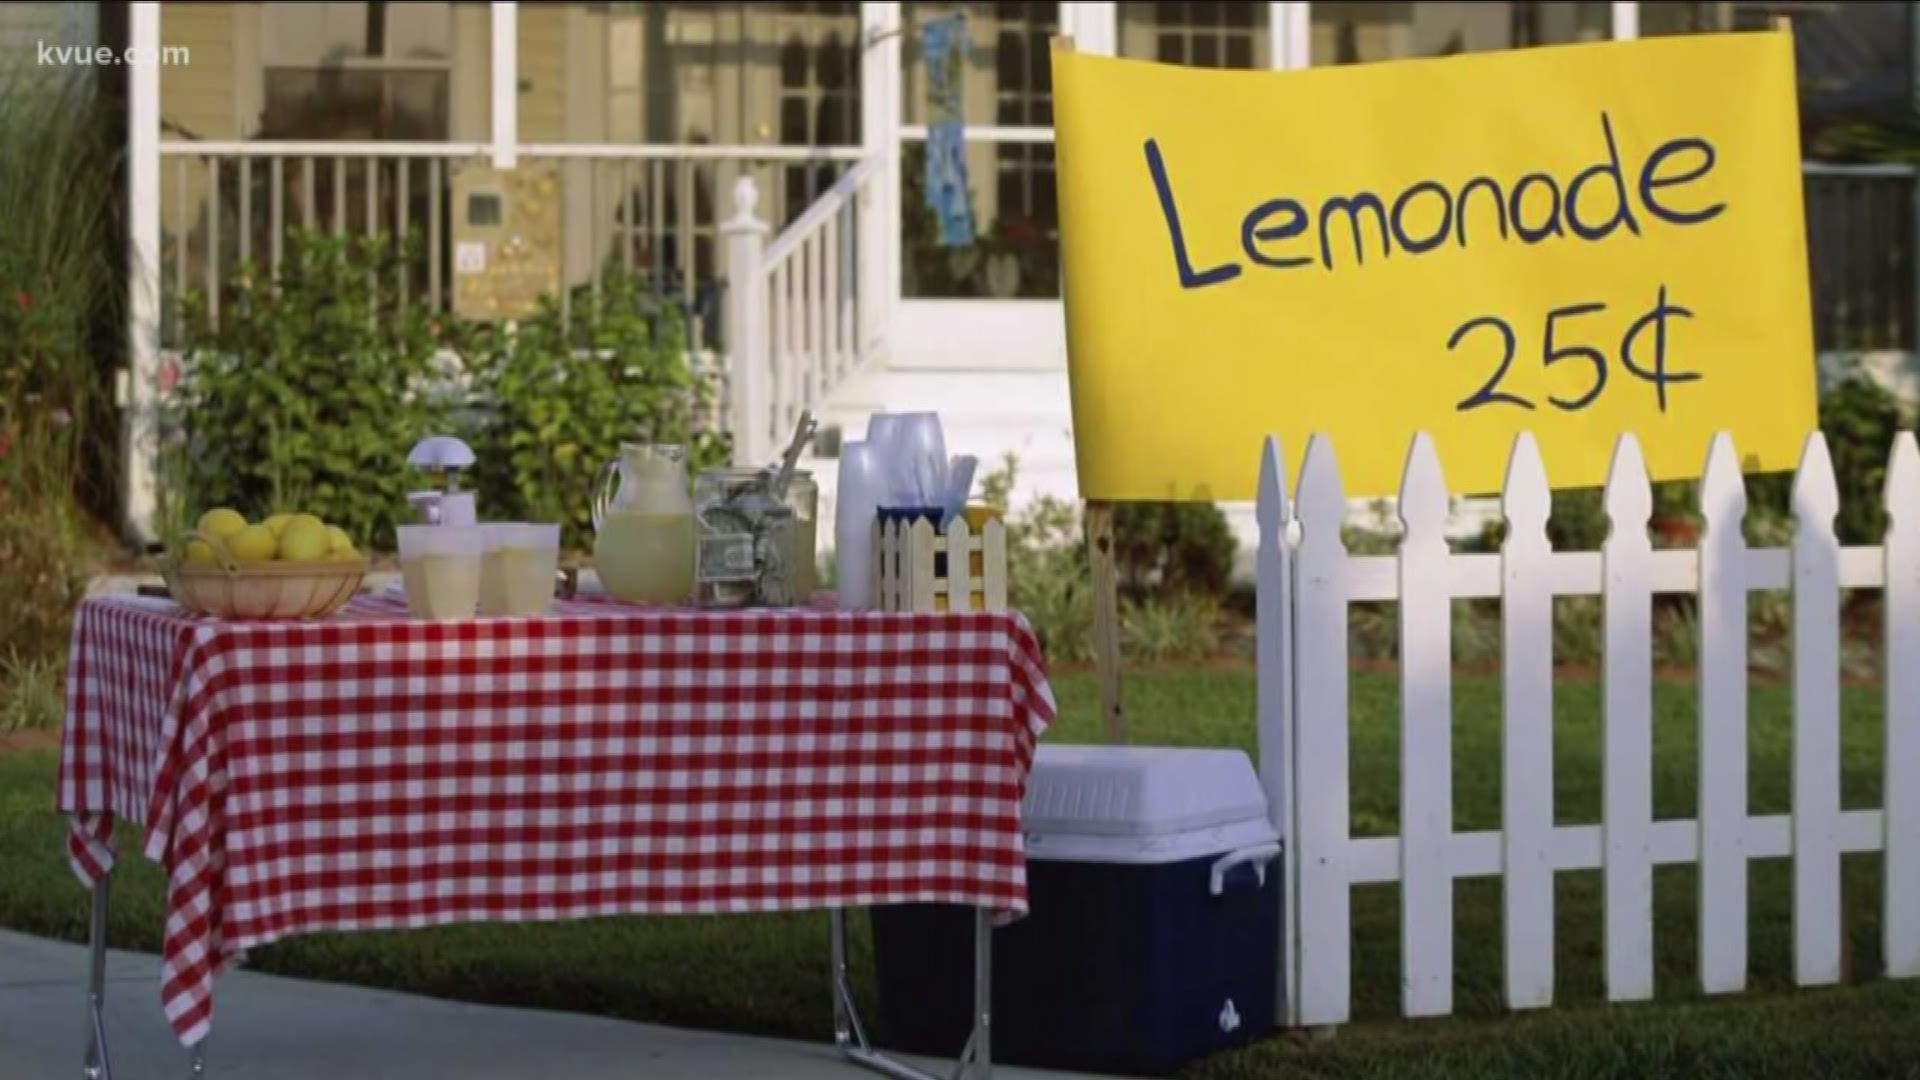 In a tweet posted Monday night, Abbott said they had to pass the law because police in Texas were shutting down lemonade stands all over the state.